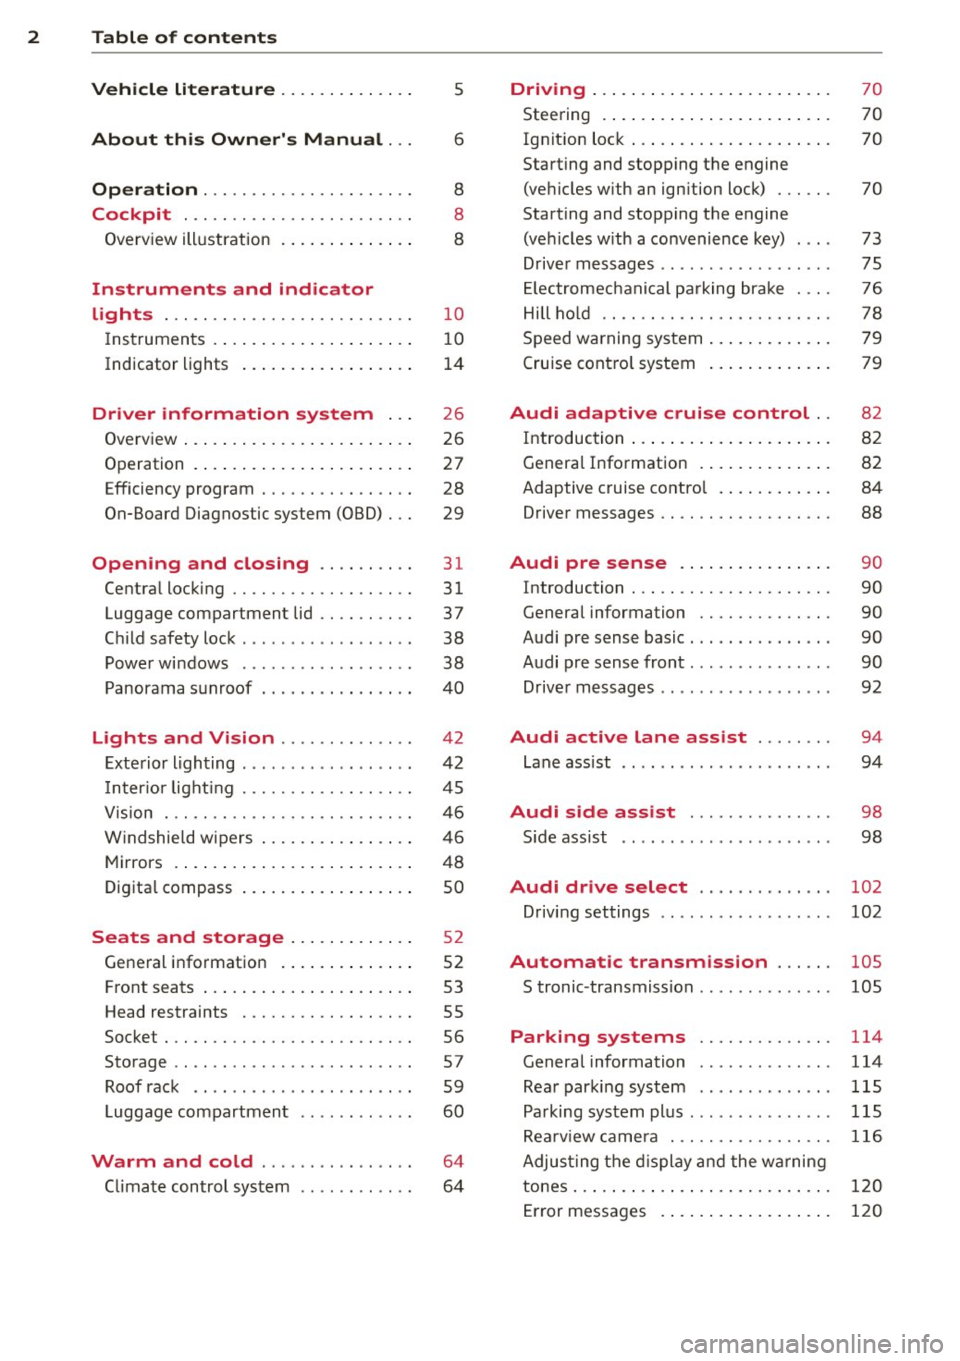 AUDI A3 2015  Owners Manual 2  Table  of  contents Vehicle  literature  . .  . .  . .  . .  . .  . . . . 
5 
About  this  Owners  Manual . . . 6 
Operation  . . . . . . .  . . . .  . . . . .  . .  . .  . . 8 
Cockpit  . . .  . 